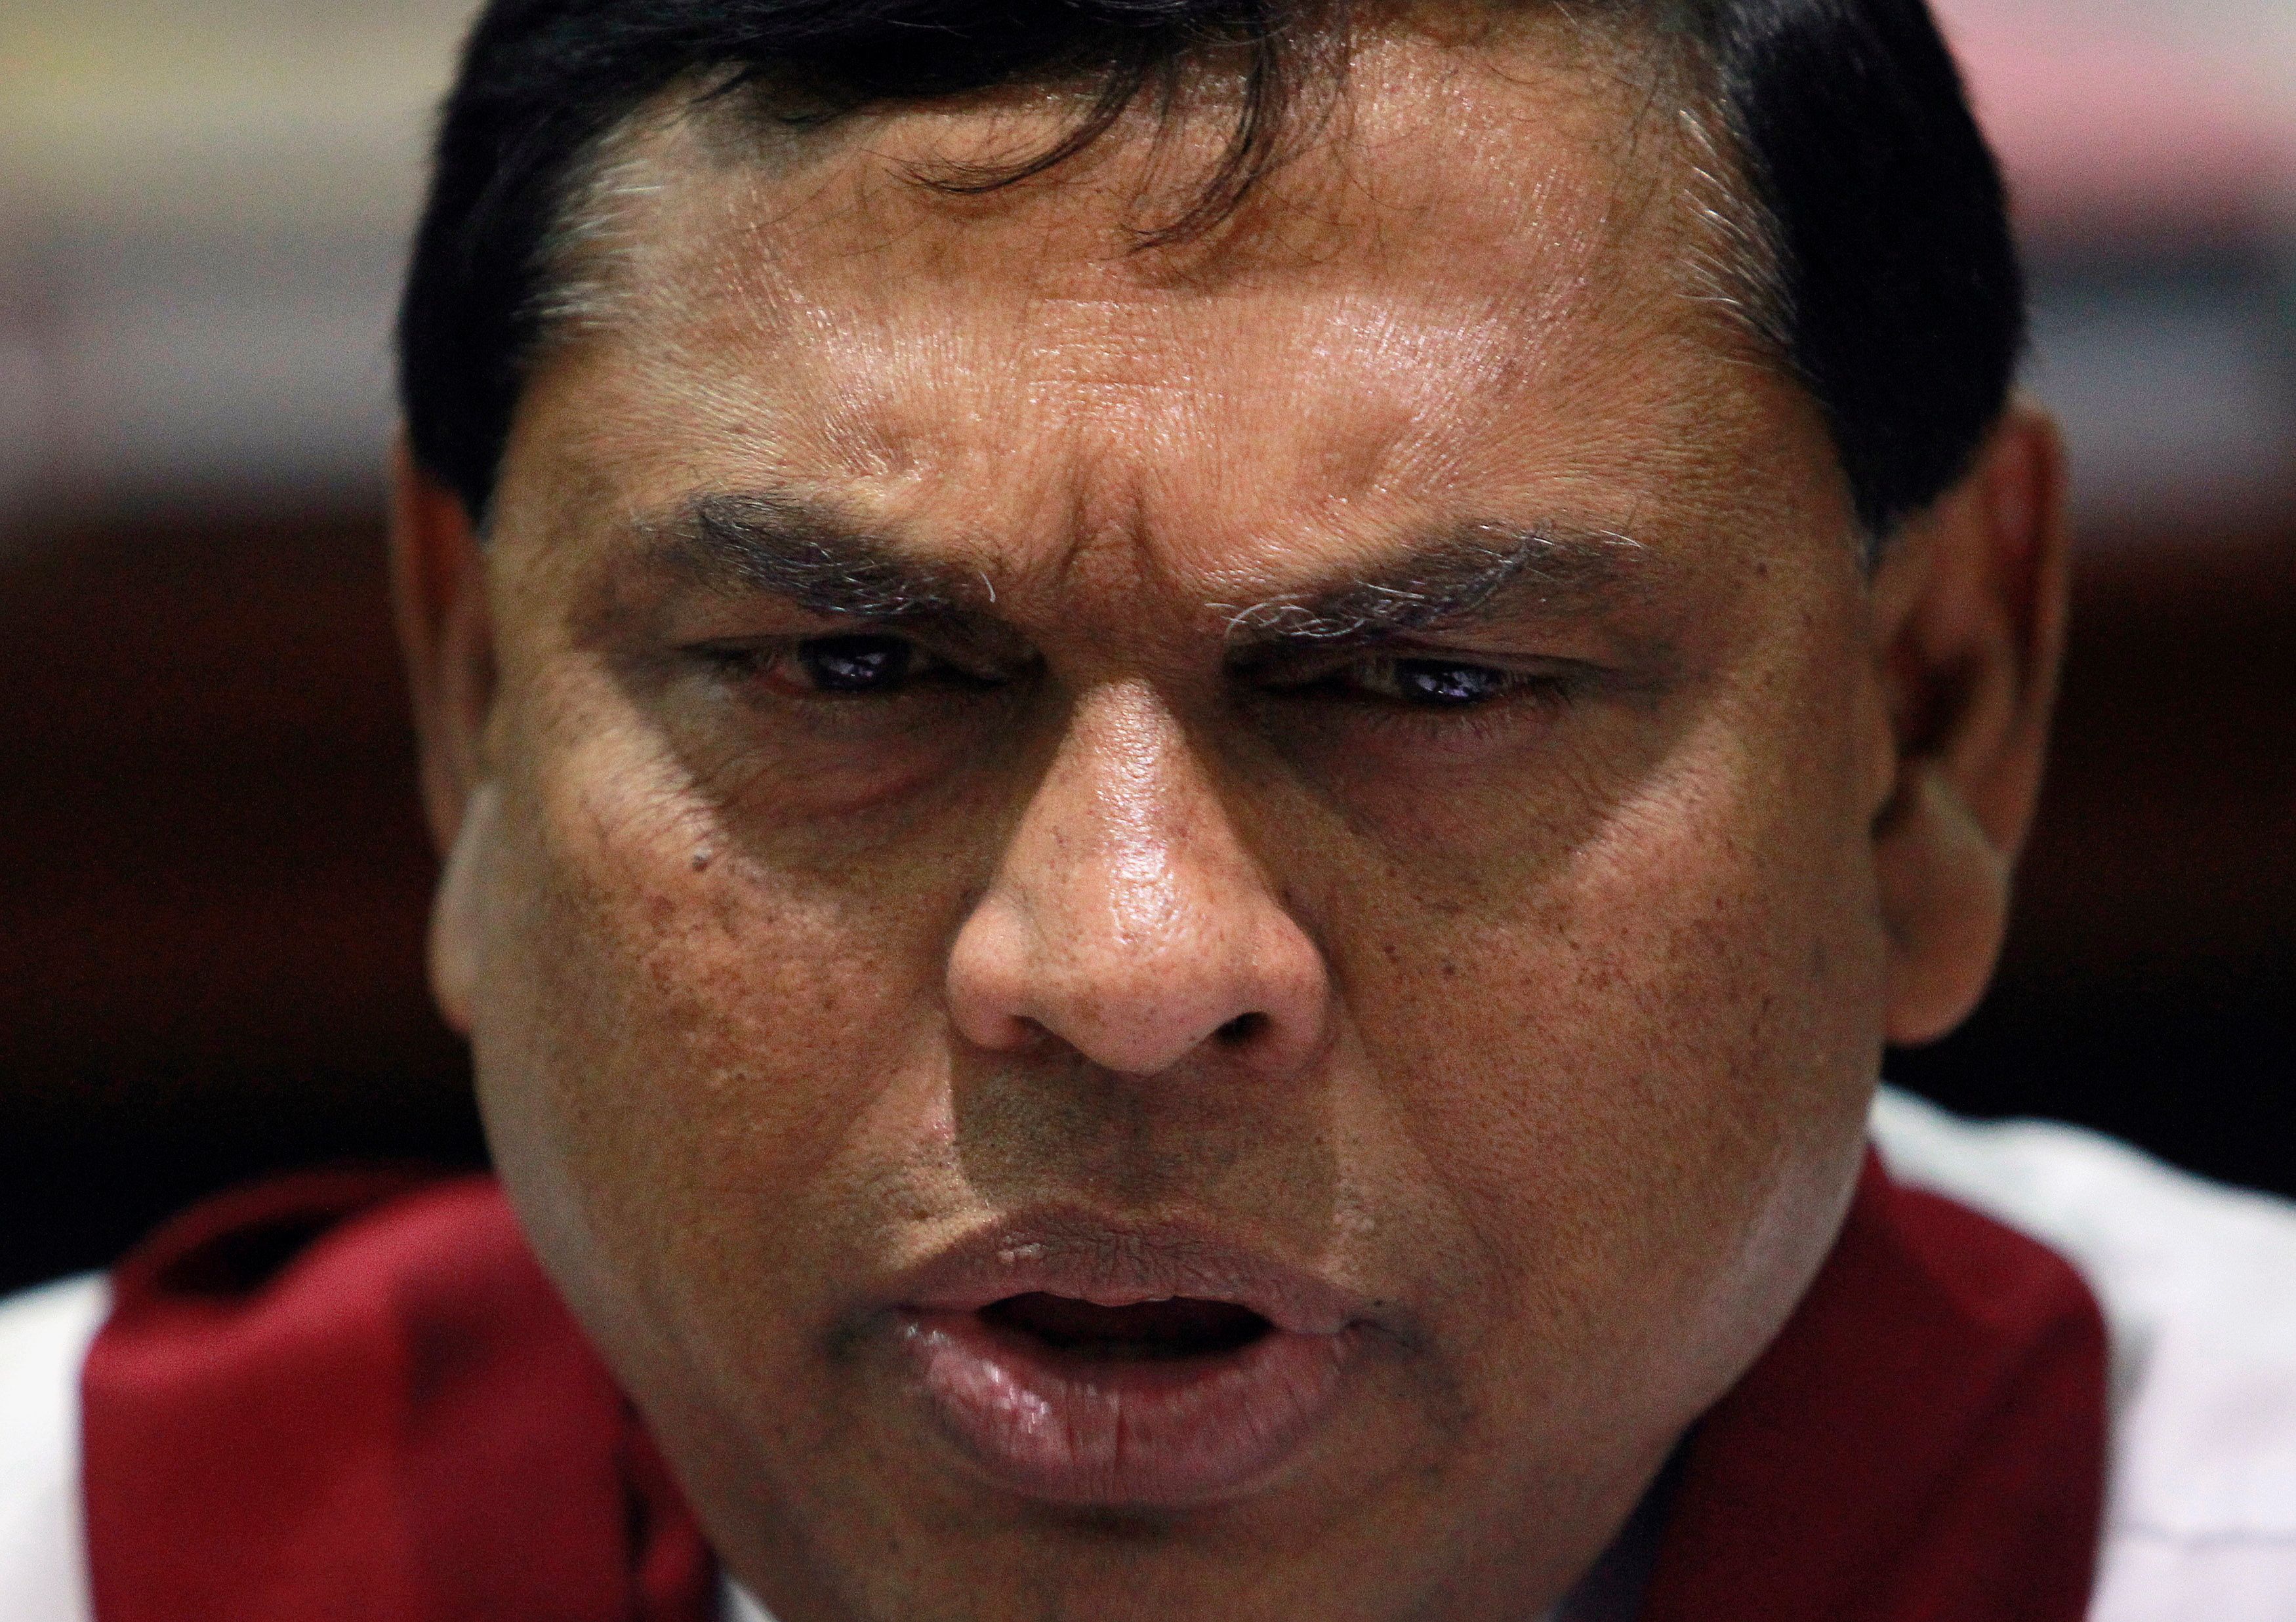 Basil Rajapaksa, speaks during an interview with Reuters in Colombo April 10, 2012. REUTERS/Dinuka Liyanawatte/File Photo